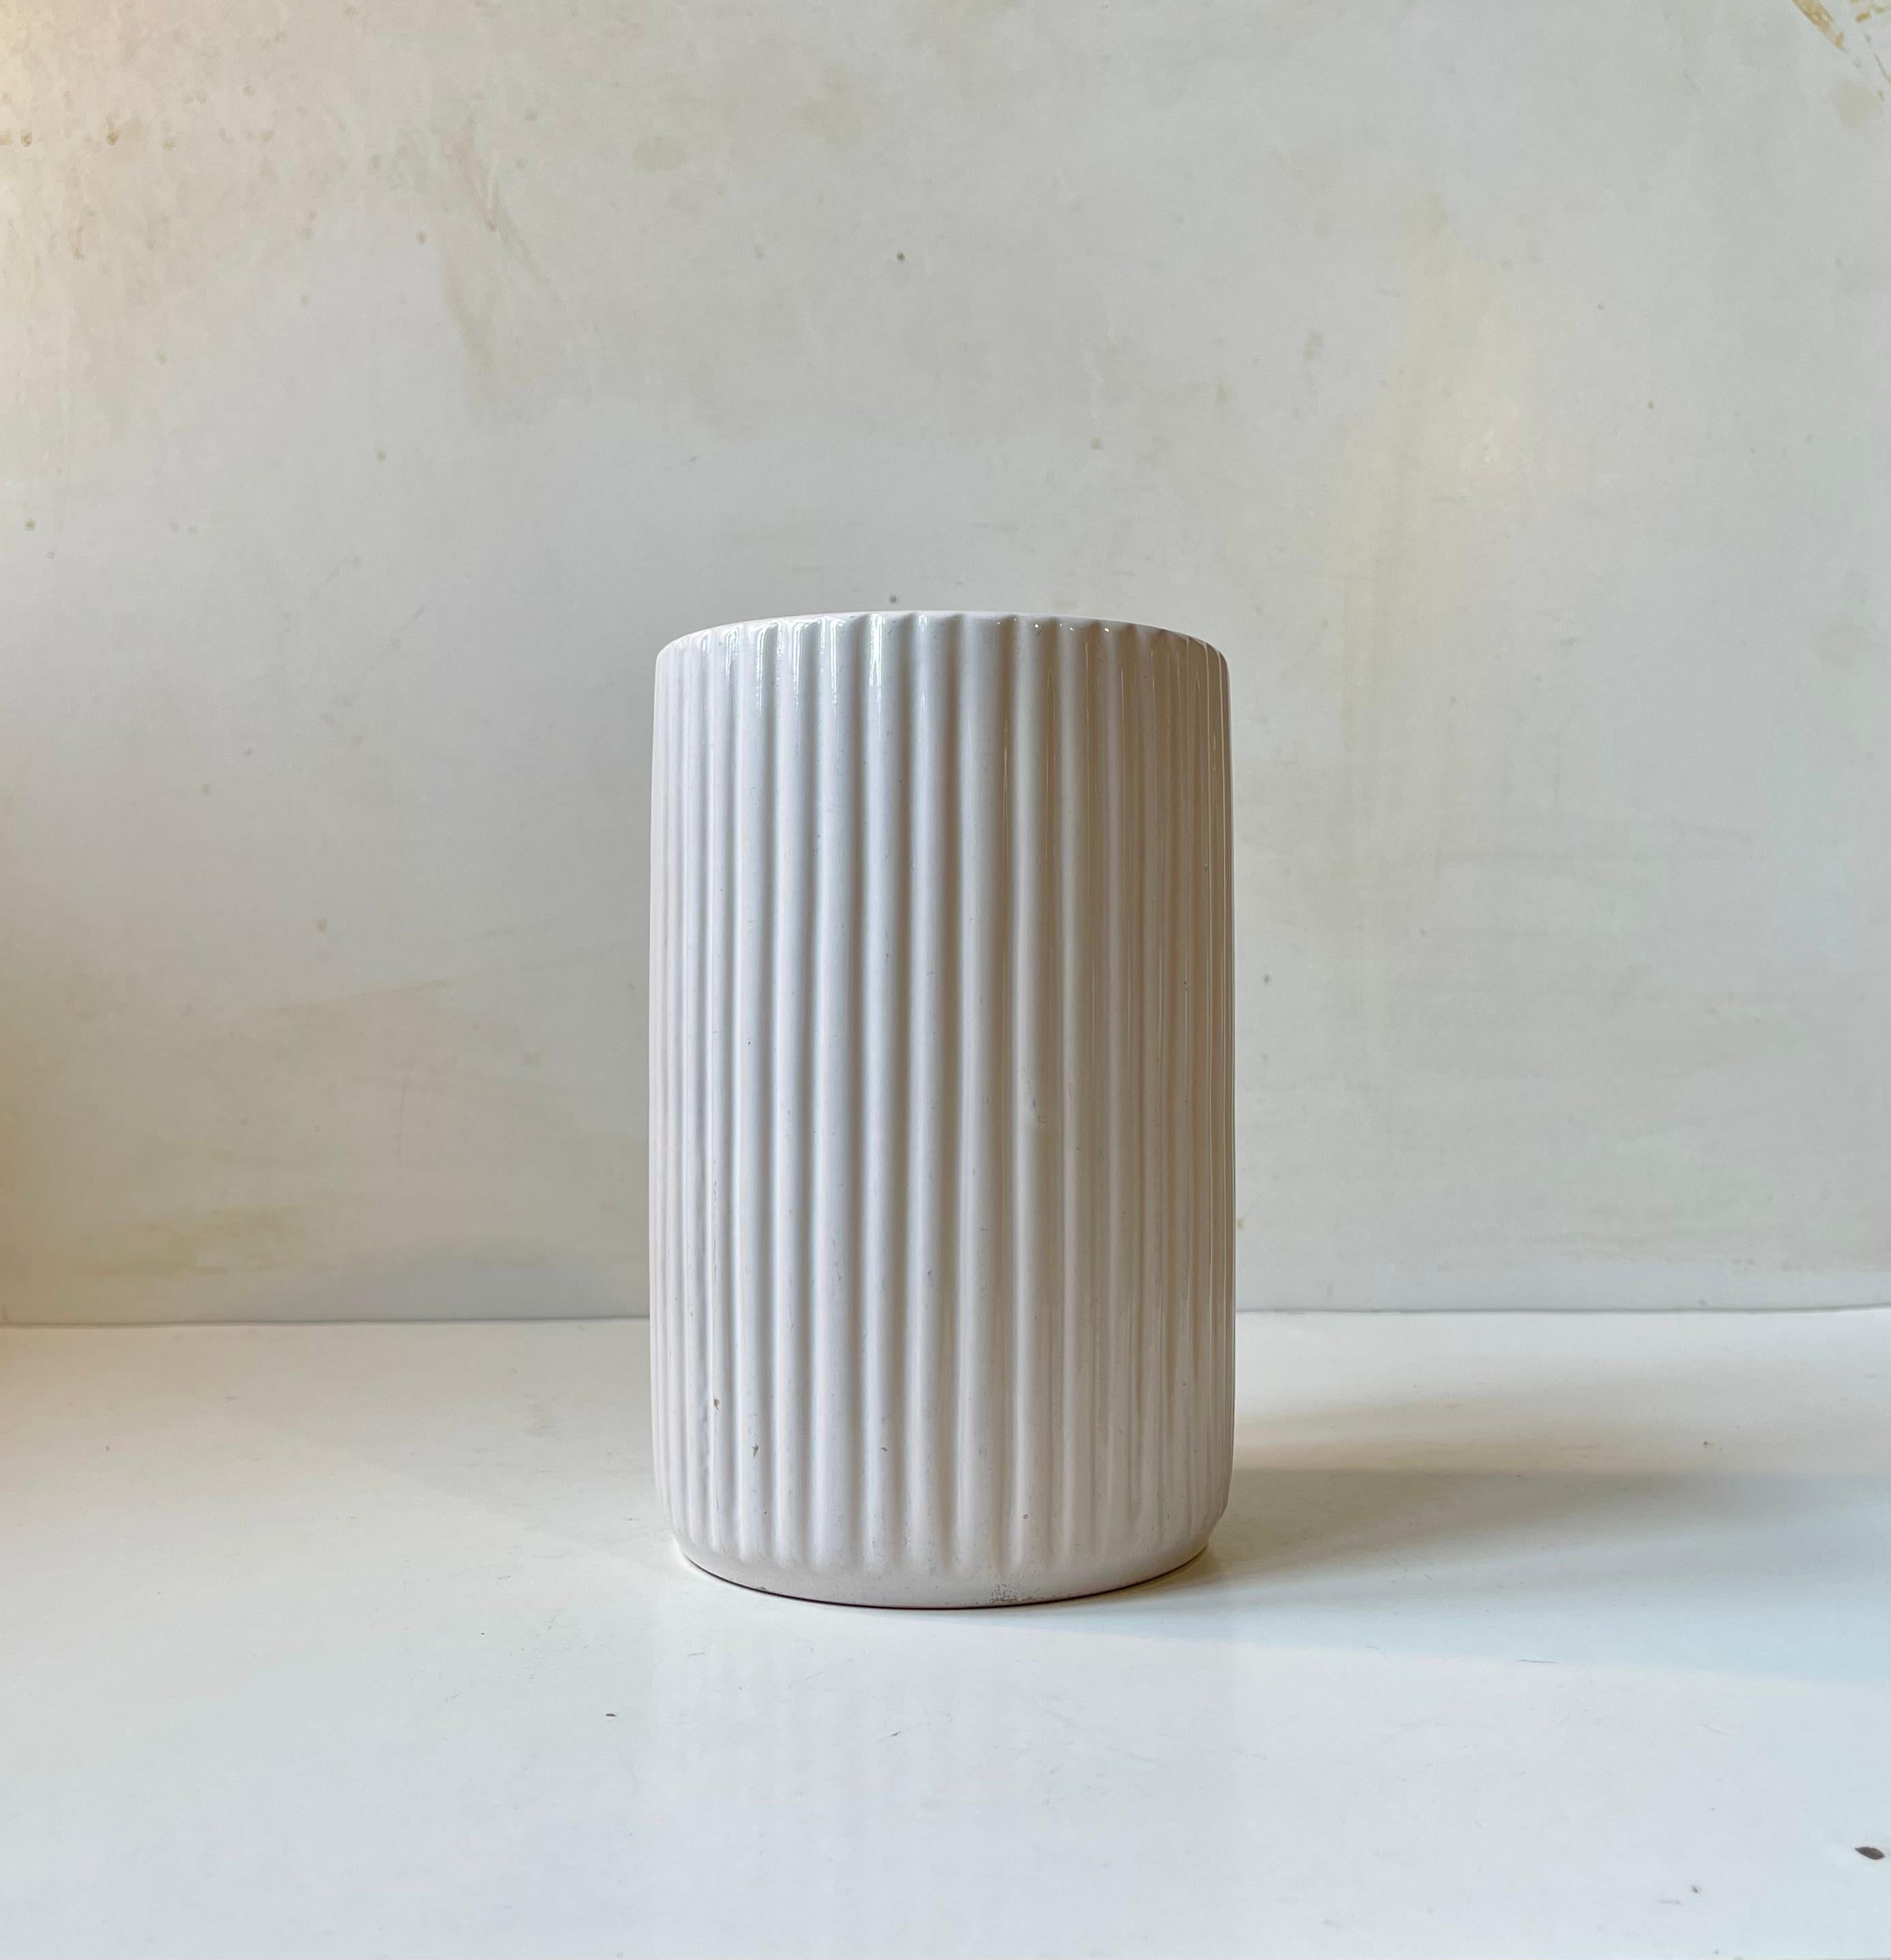 Large vase decorated with vertical ribbings and white glaze. Strict architectural derived Art Deco styling. Very similar to the iconic Lyngby Vases and Arne Bangs form-language. But this one was designed and manufactured by L. Hjorth on the Island